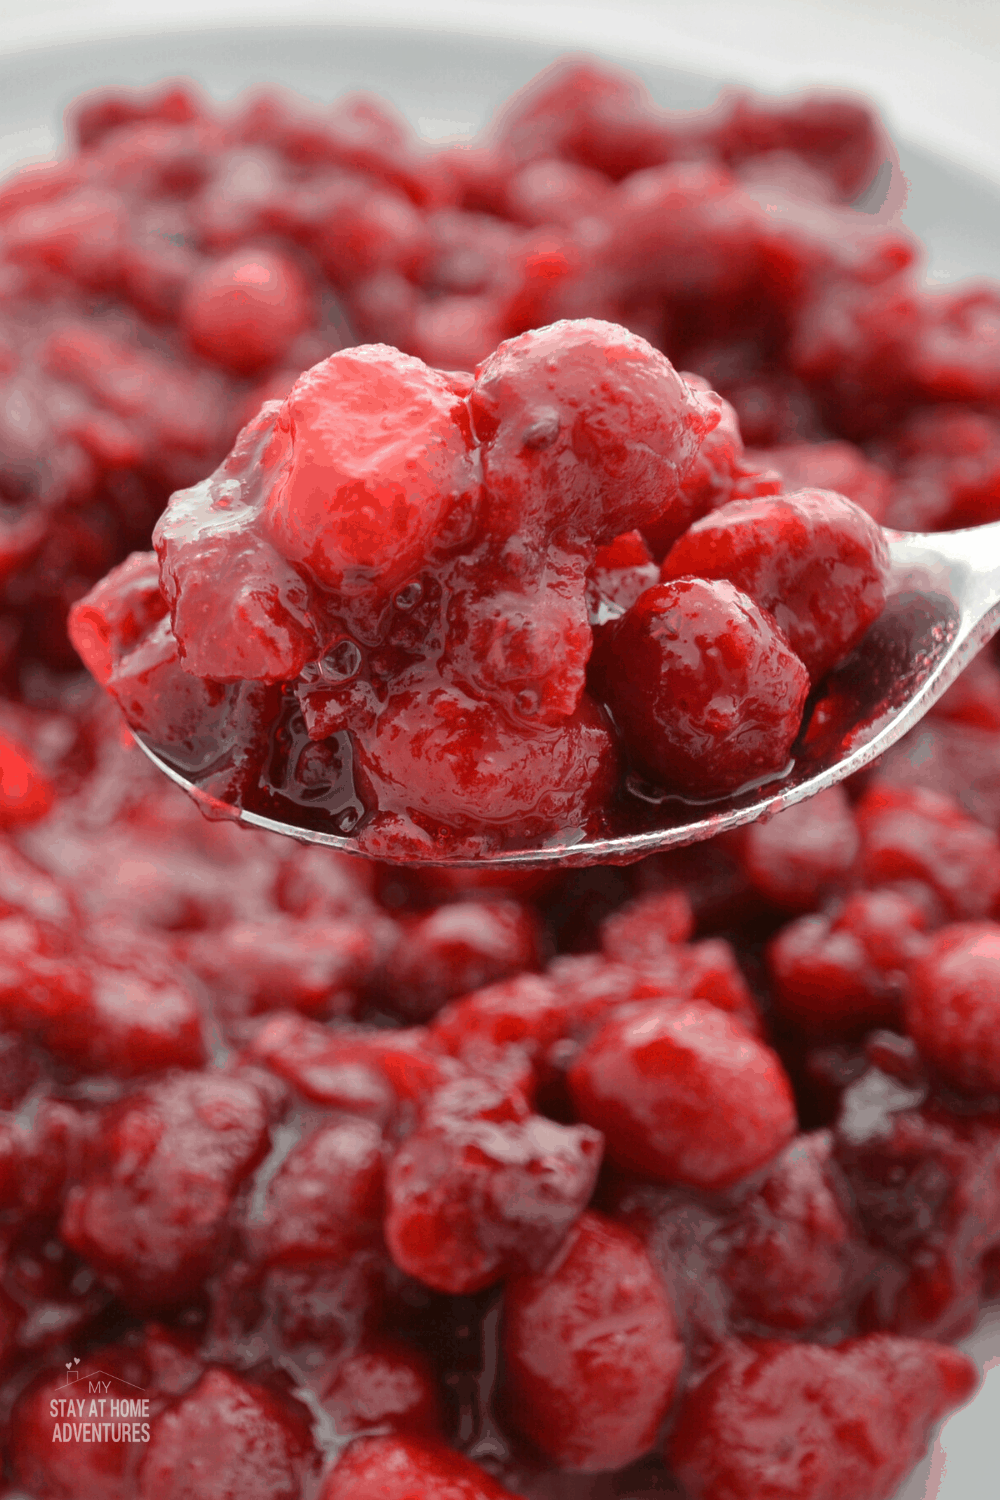 The holidays are around the corner, create this simple homemade cranberry sauce made with orange juice and fresh cranberries. via @mystayathome